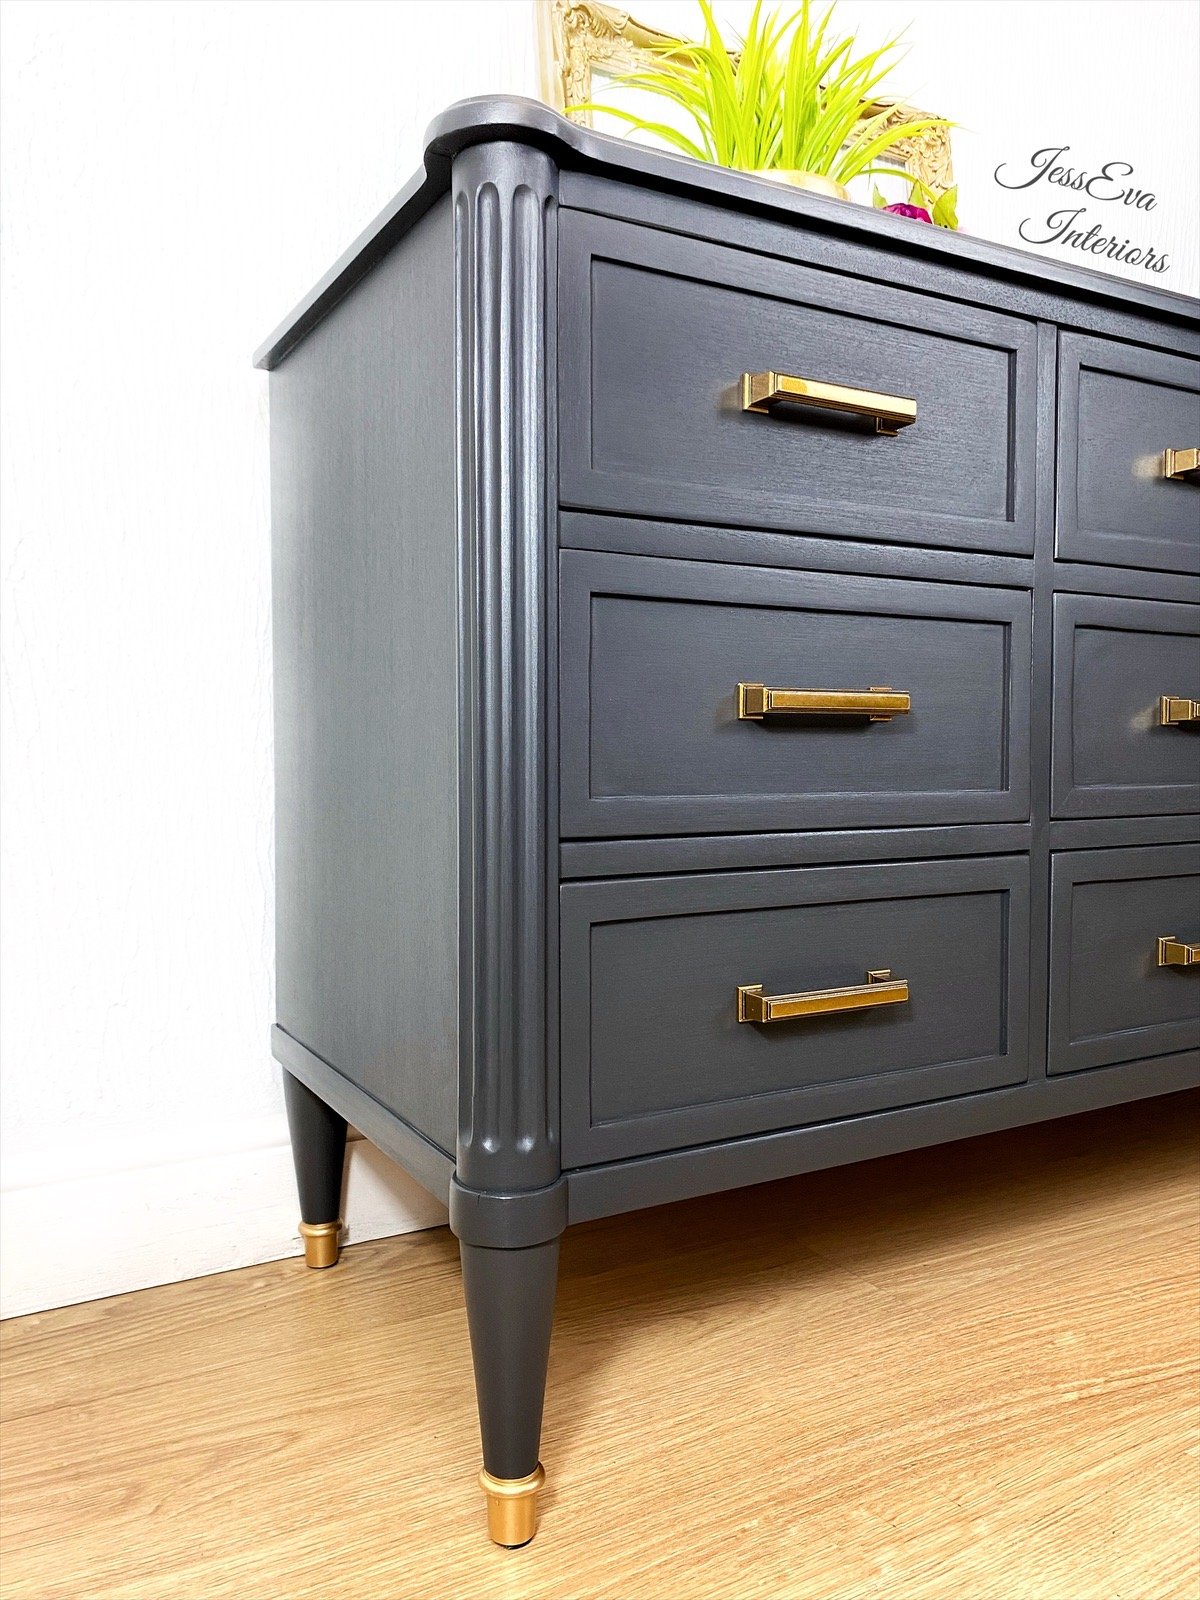 Large Stag Chest Of Drawers / Sideboard in dark grey